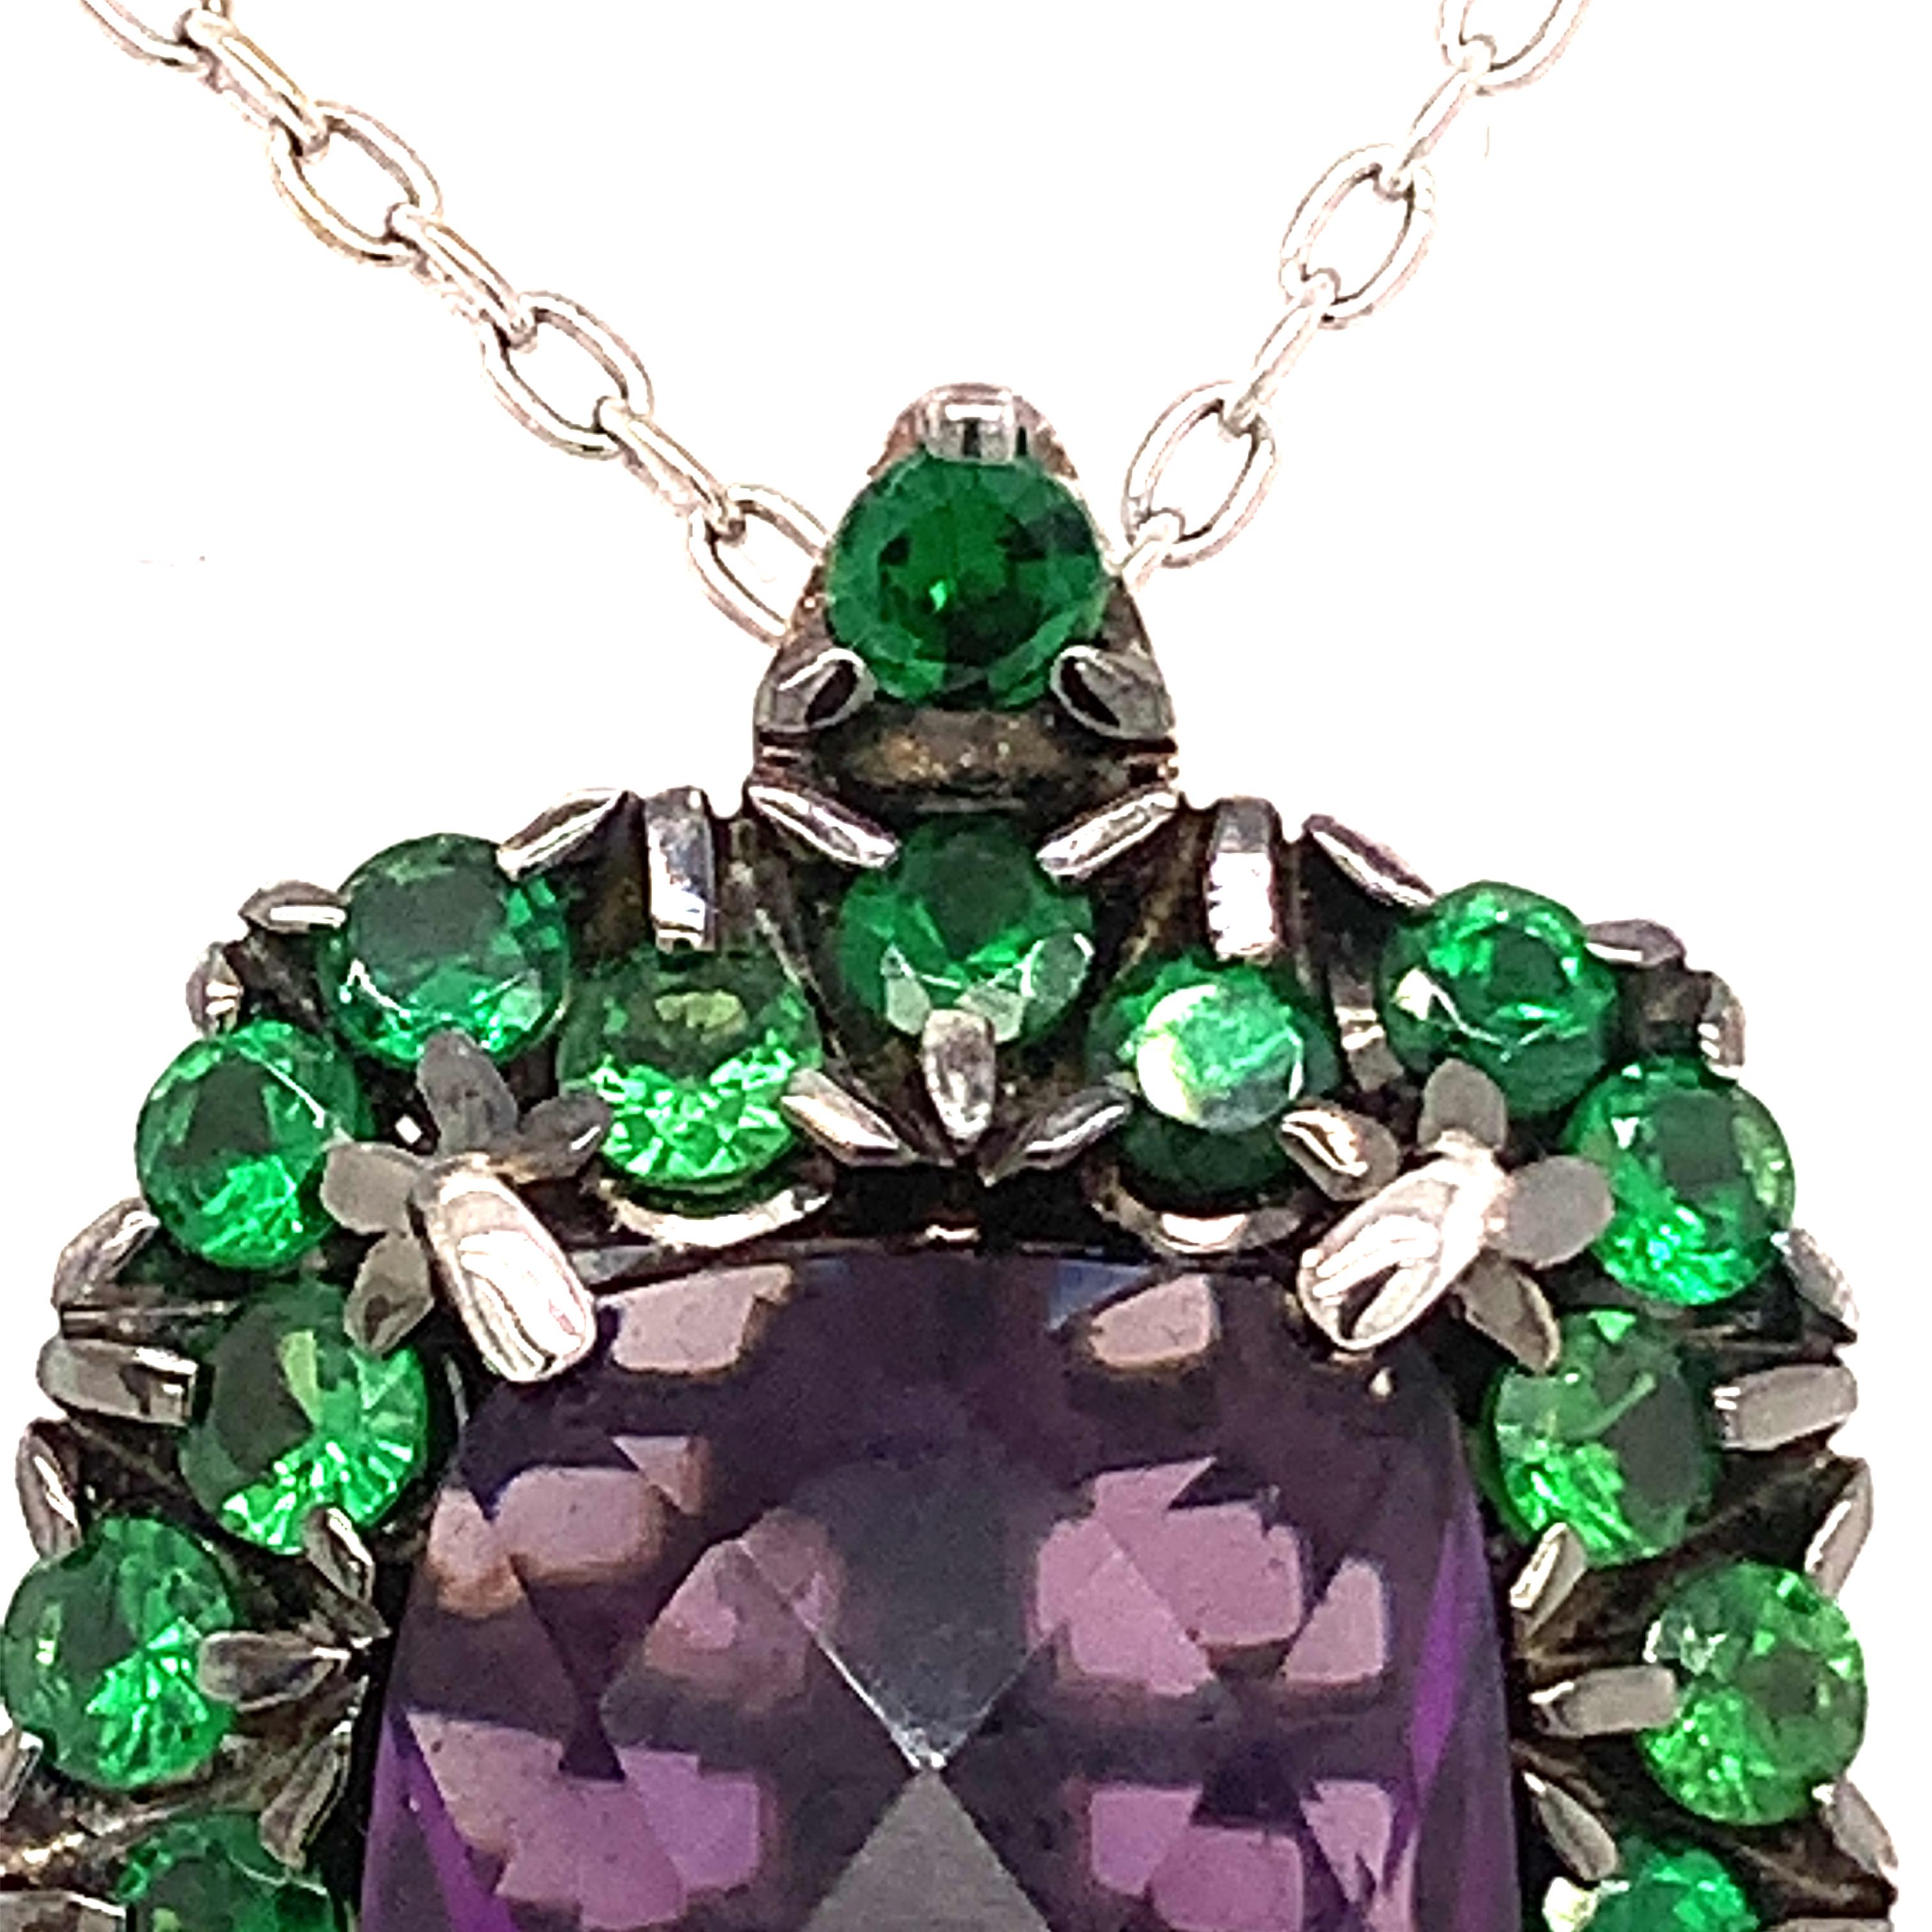 18 Karat White Gold Garavelli Pendant with Chain with Tzavorite and Amethyst 4